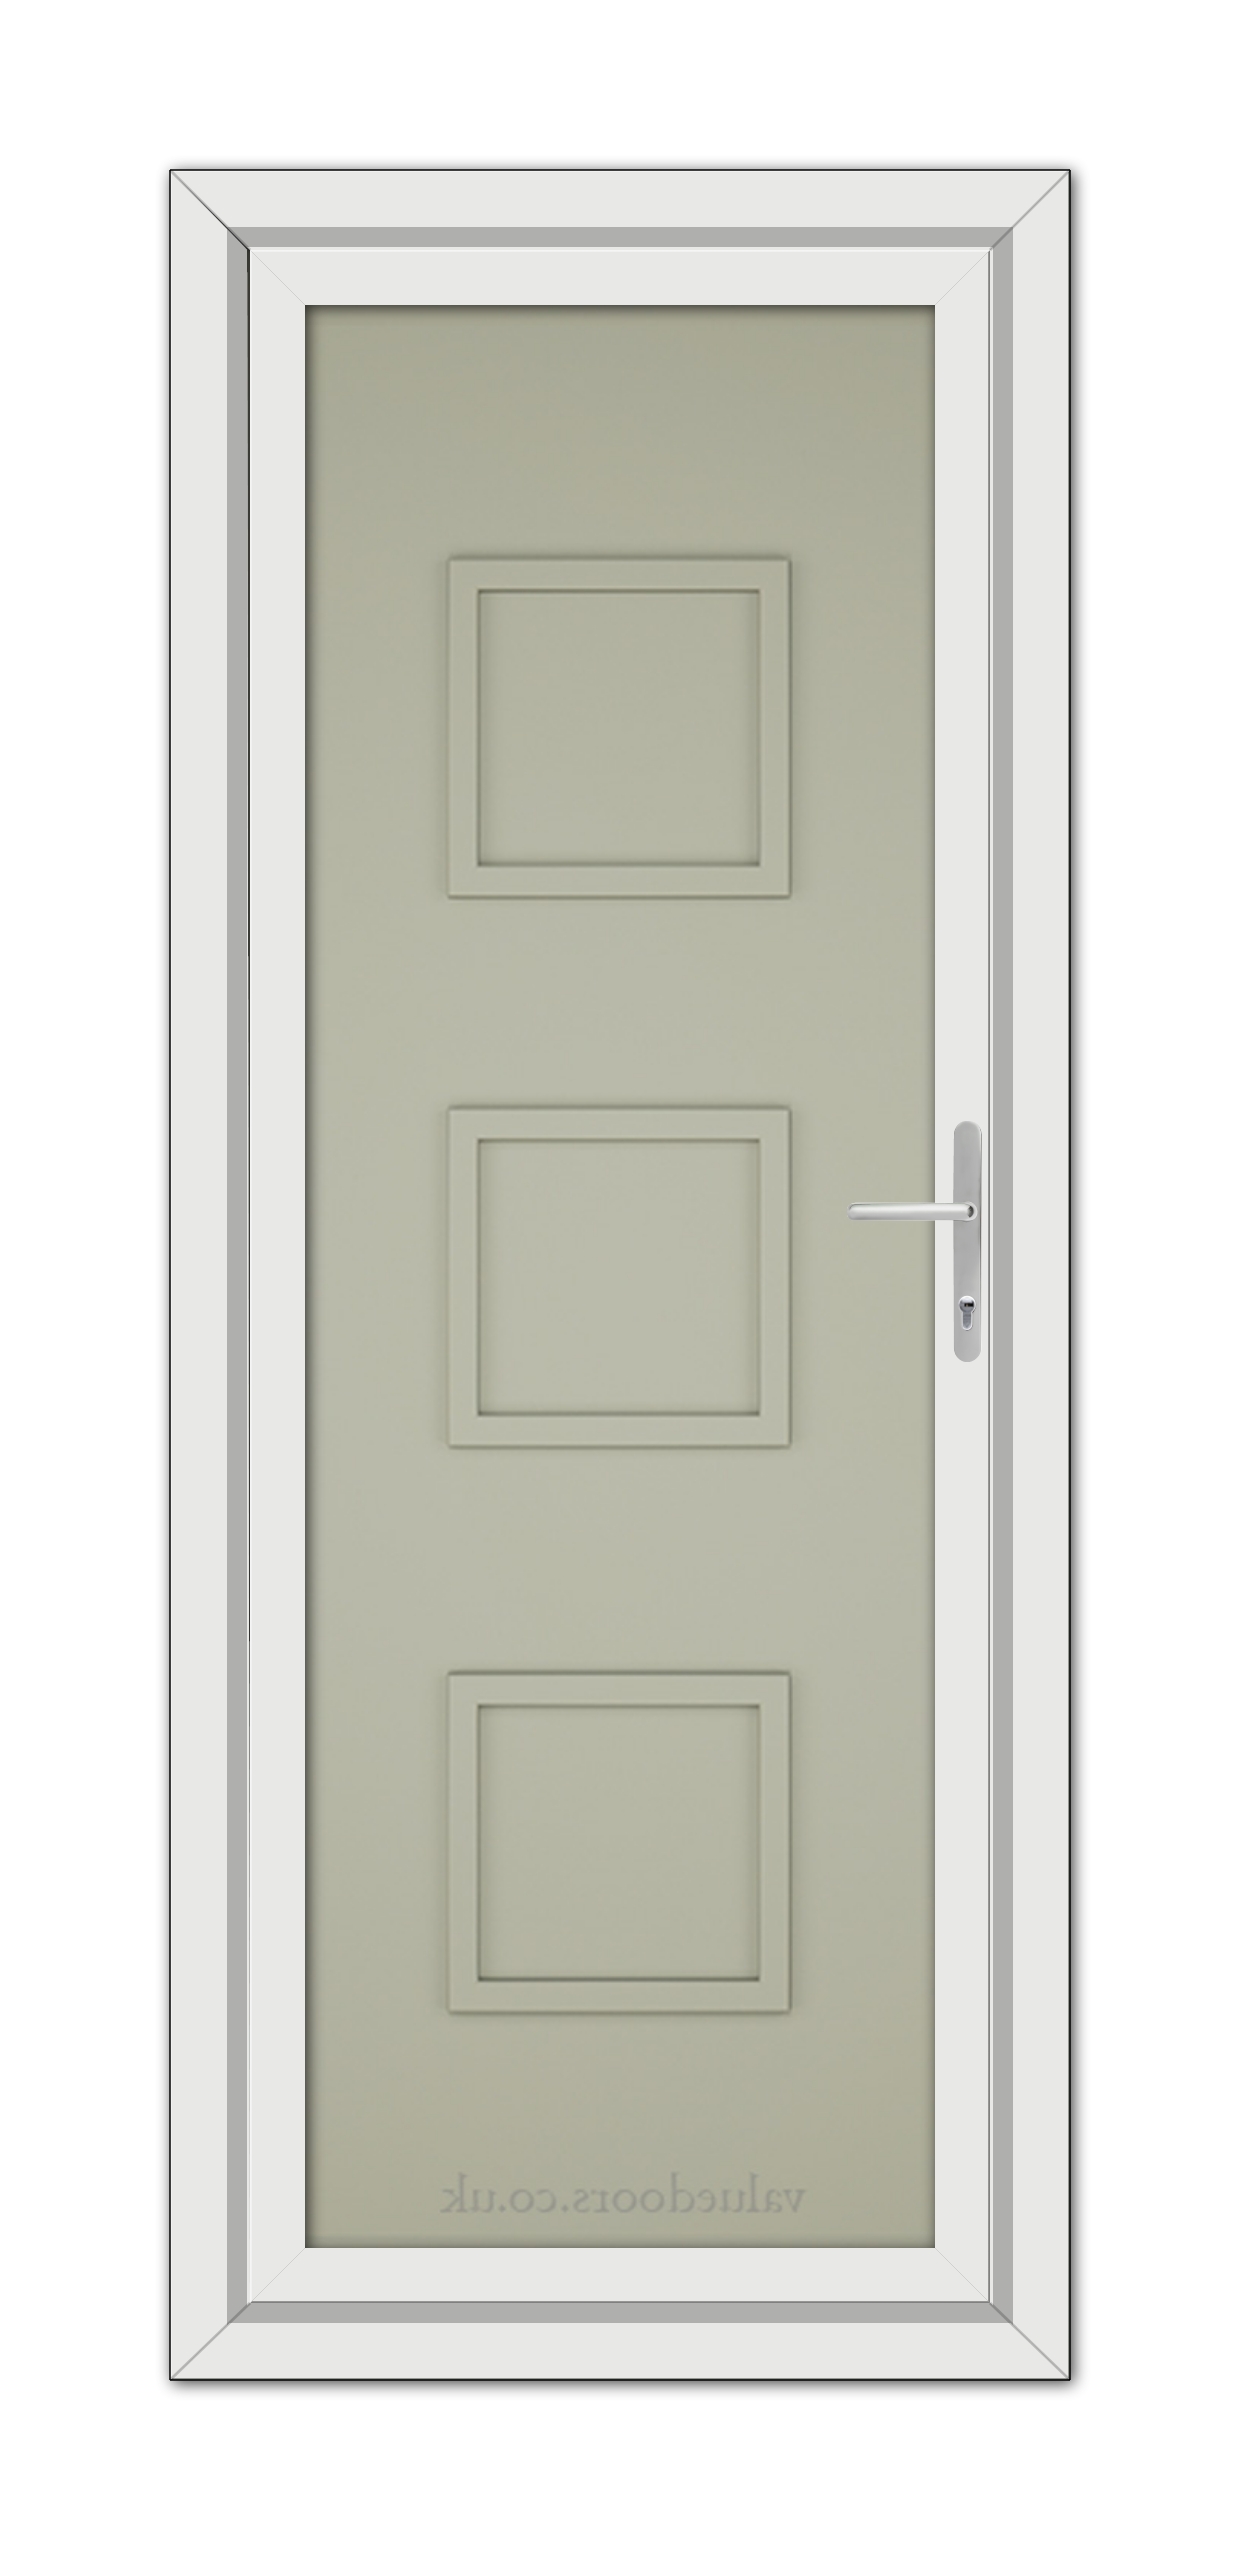 A modern Agate Grey door with three rectangular panels and a silver handle, set within a white frame.